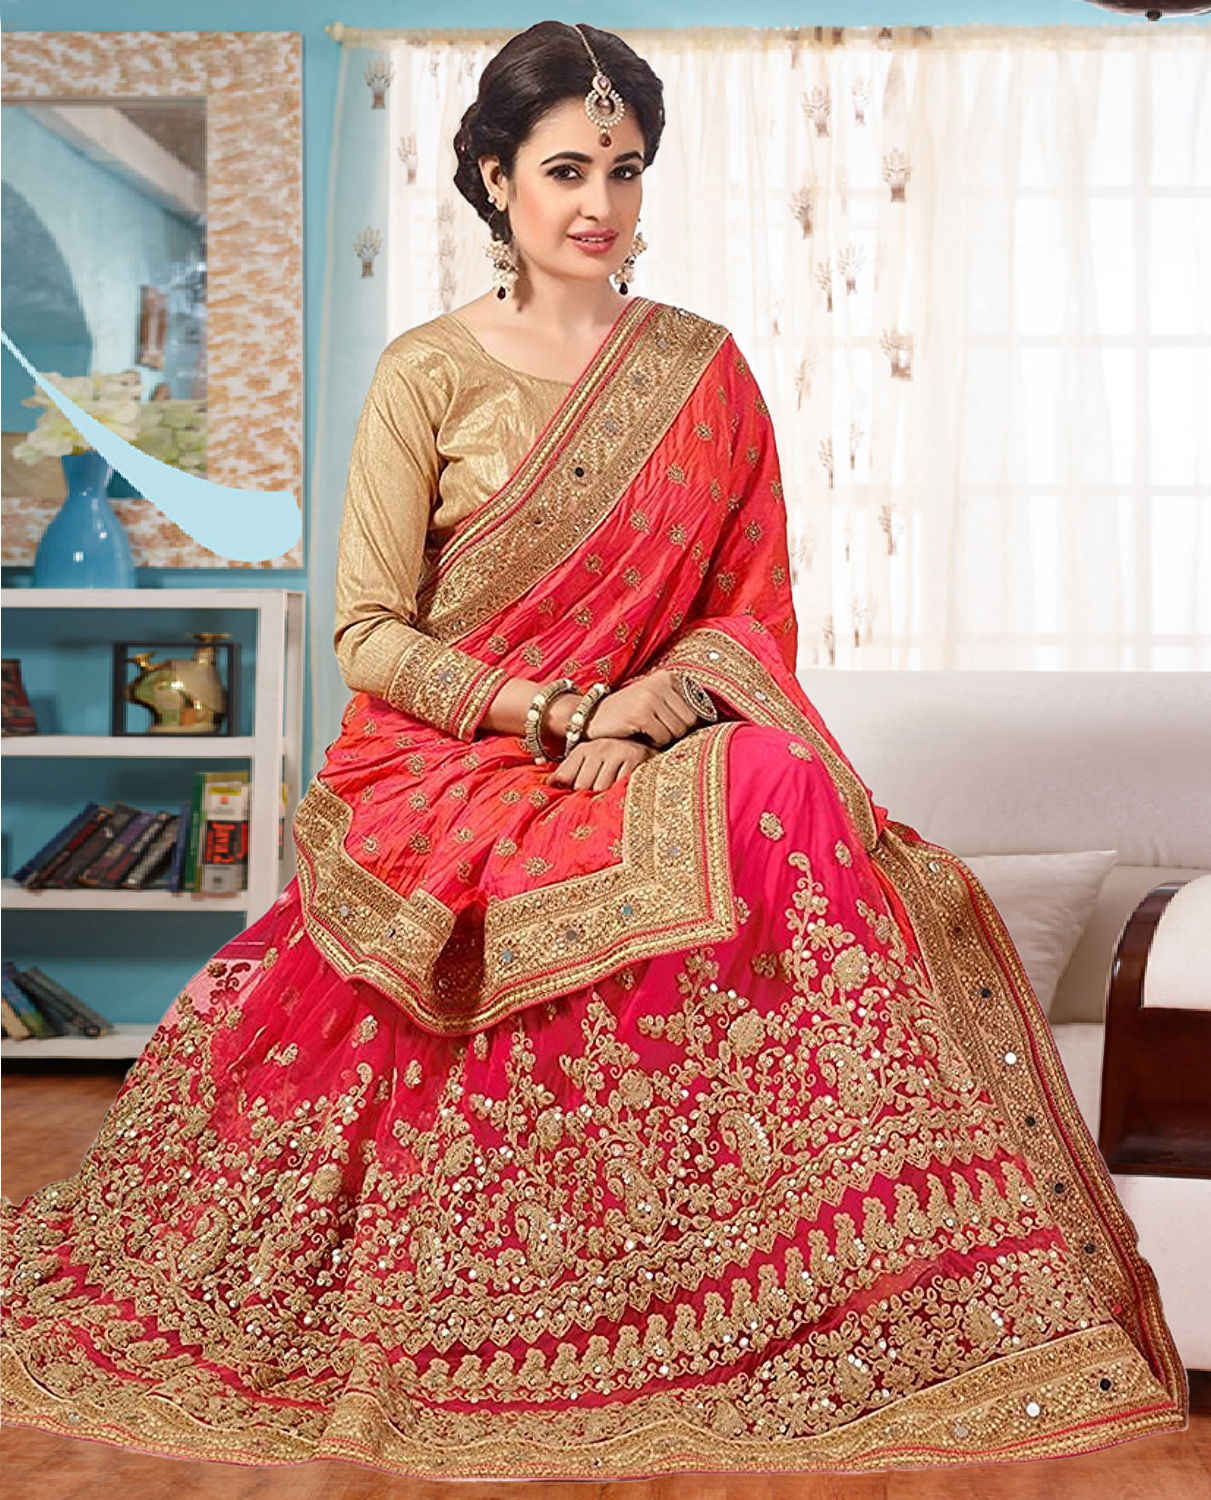 Exlclusive   Designer Embrodery  Vichitra  with net  Silk saree